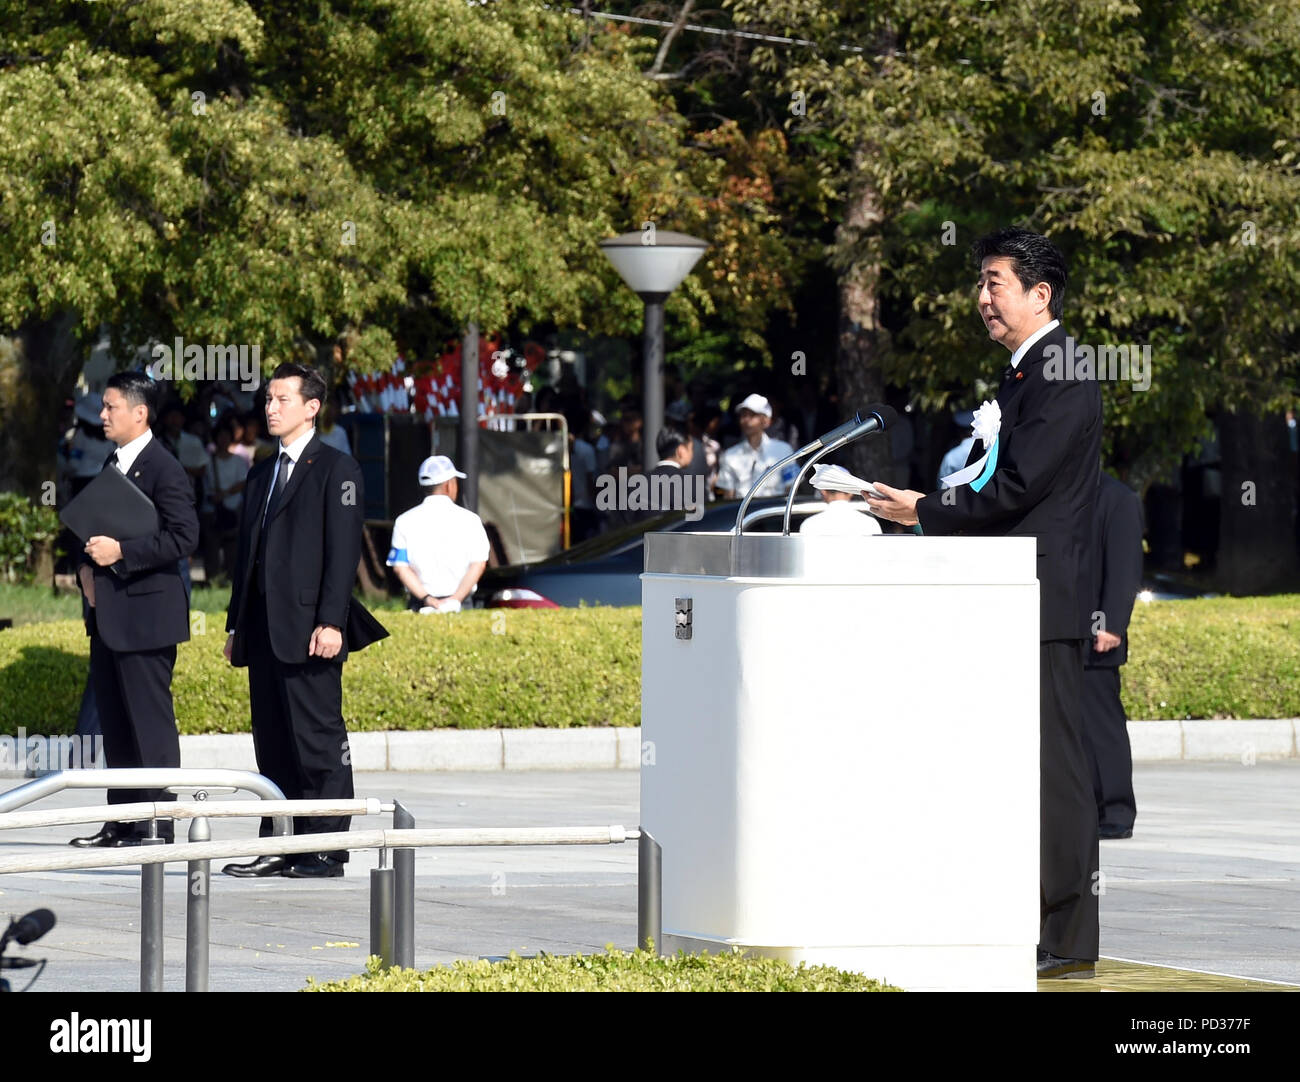 Hiroshima. 6th Aug, 2018. Japanese Prime Minister Shinzo Abe (Front) speaks during a ceremony commemorating the 73rd anniversary of the atomic bombing of Hiroshima at the Peace Memorial Park in Hiroshima, Japan on Aug. 6, 2018. Credit: Ma Ping/Xinhua/Alamy Live News Stock Photo